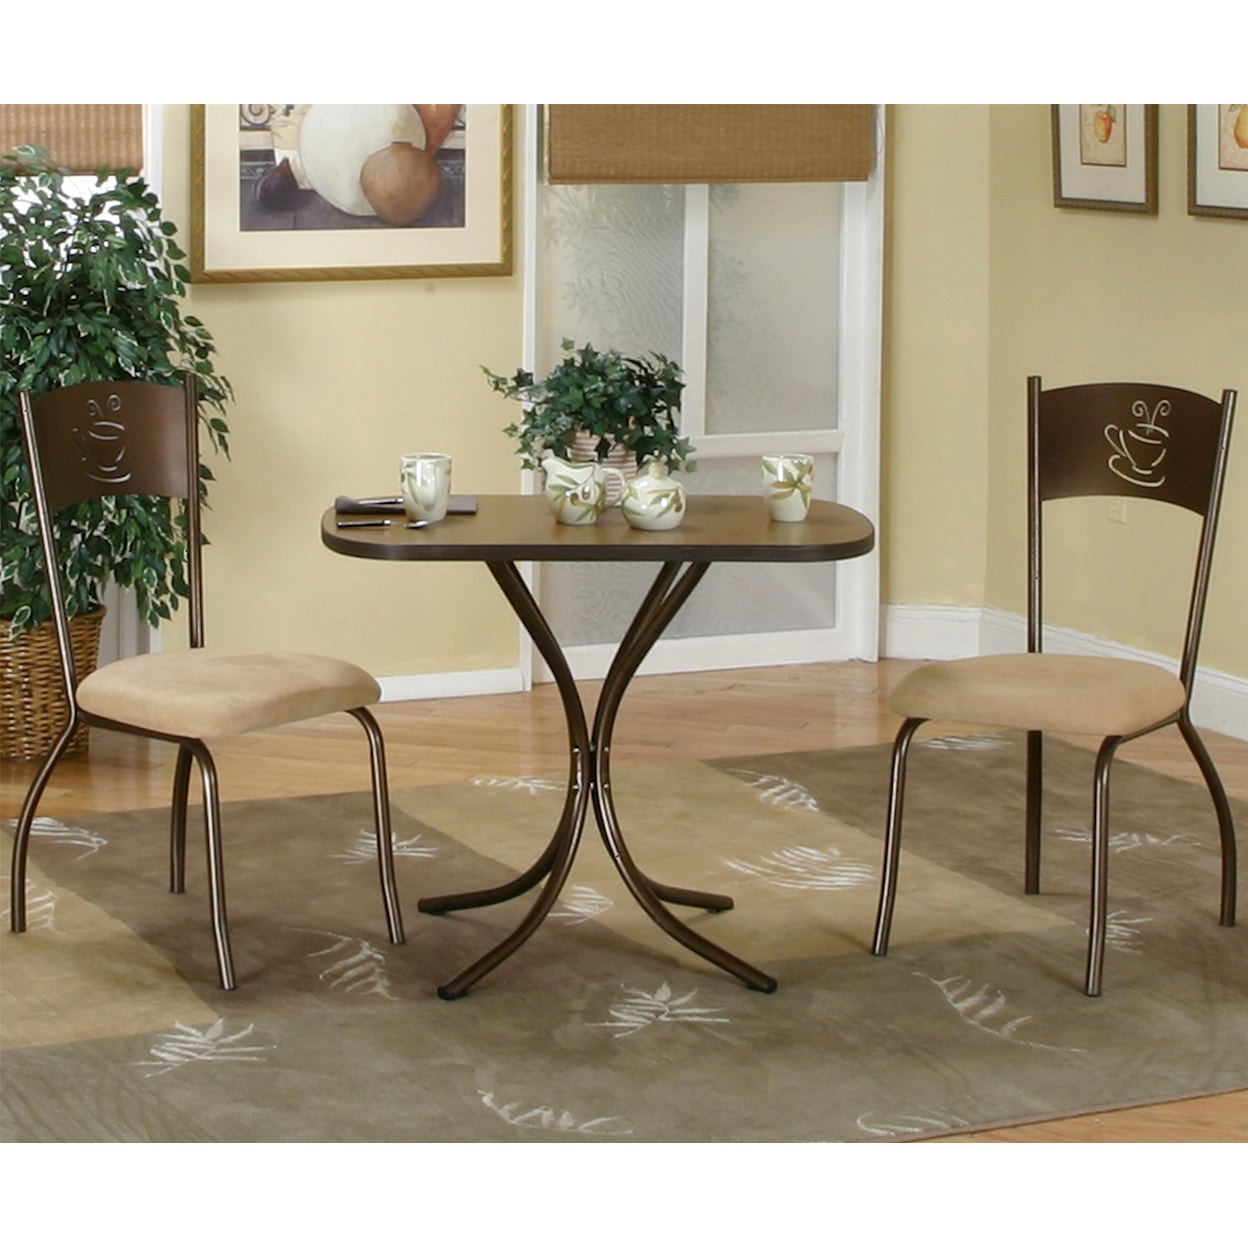 Cramco, Inc Cramco Dinettes - Java Rectangular Town Table and Chair Set